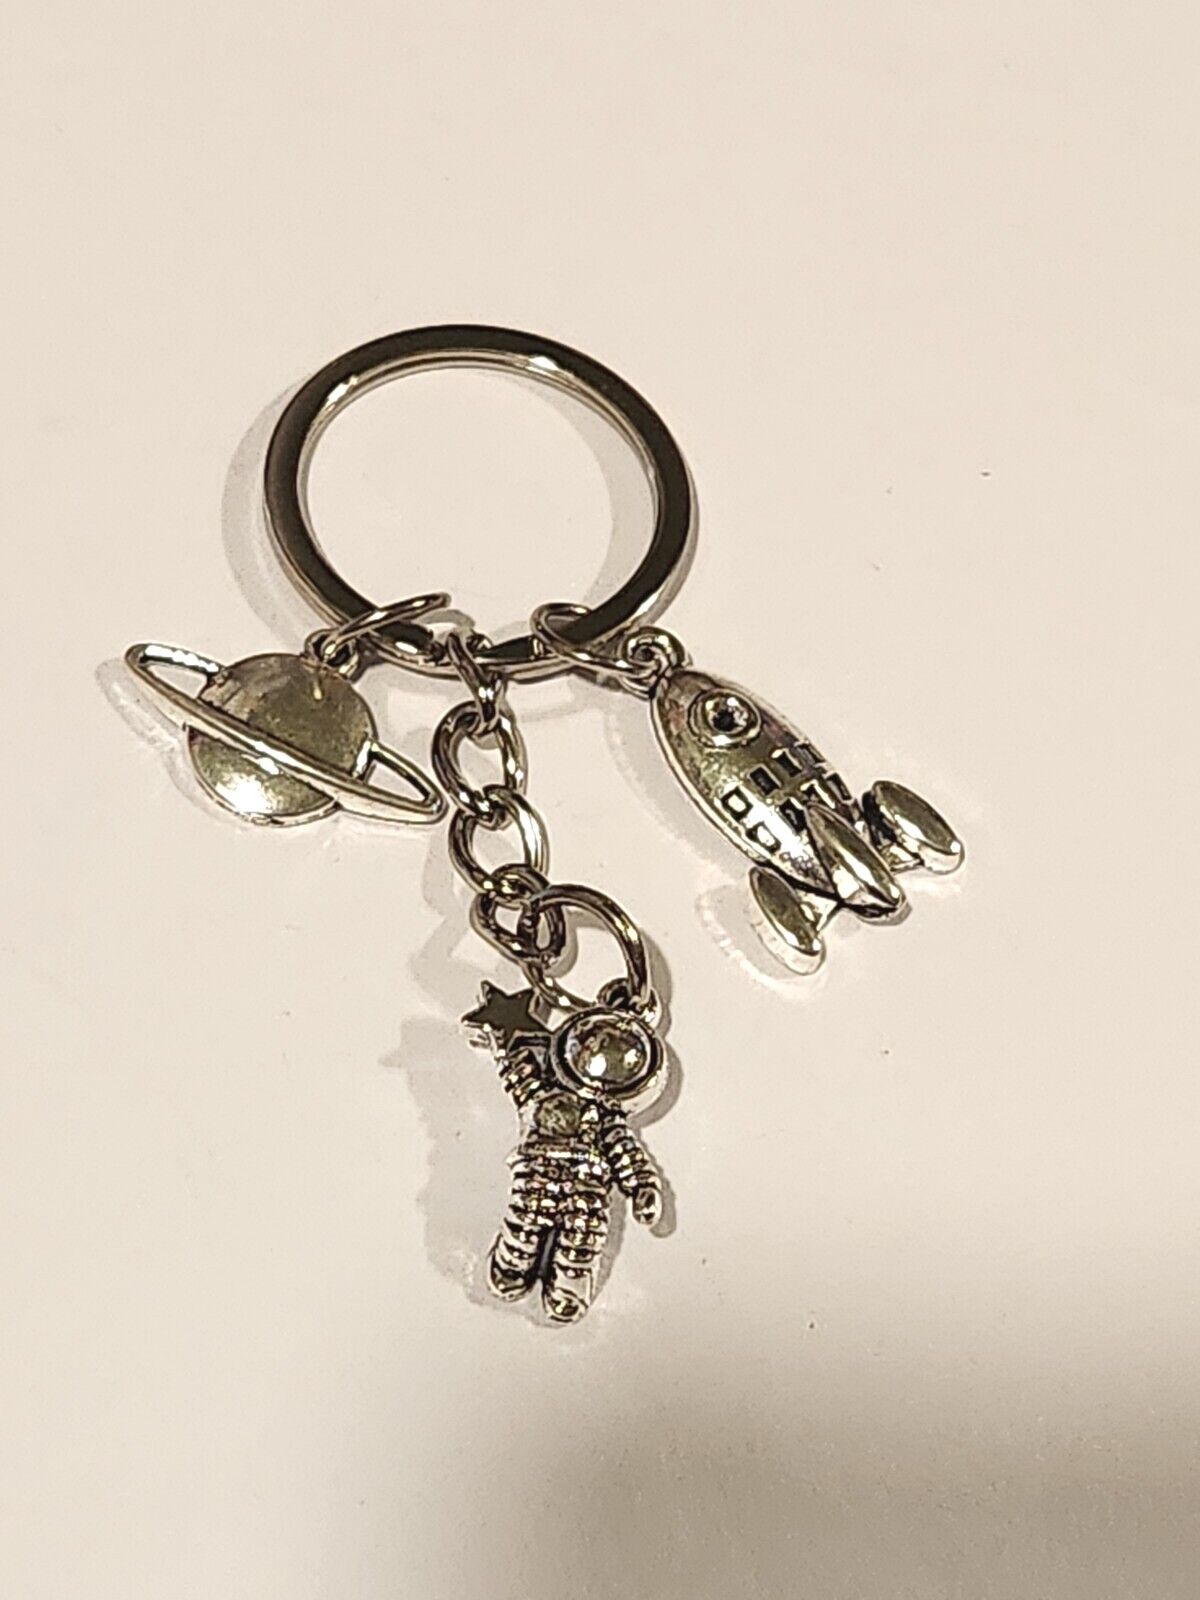 Space Keychain Astronaut Rocket Planet Keychain Silver Outer Space